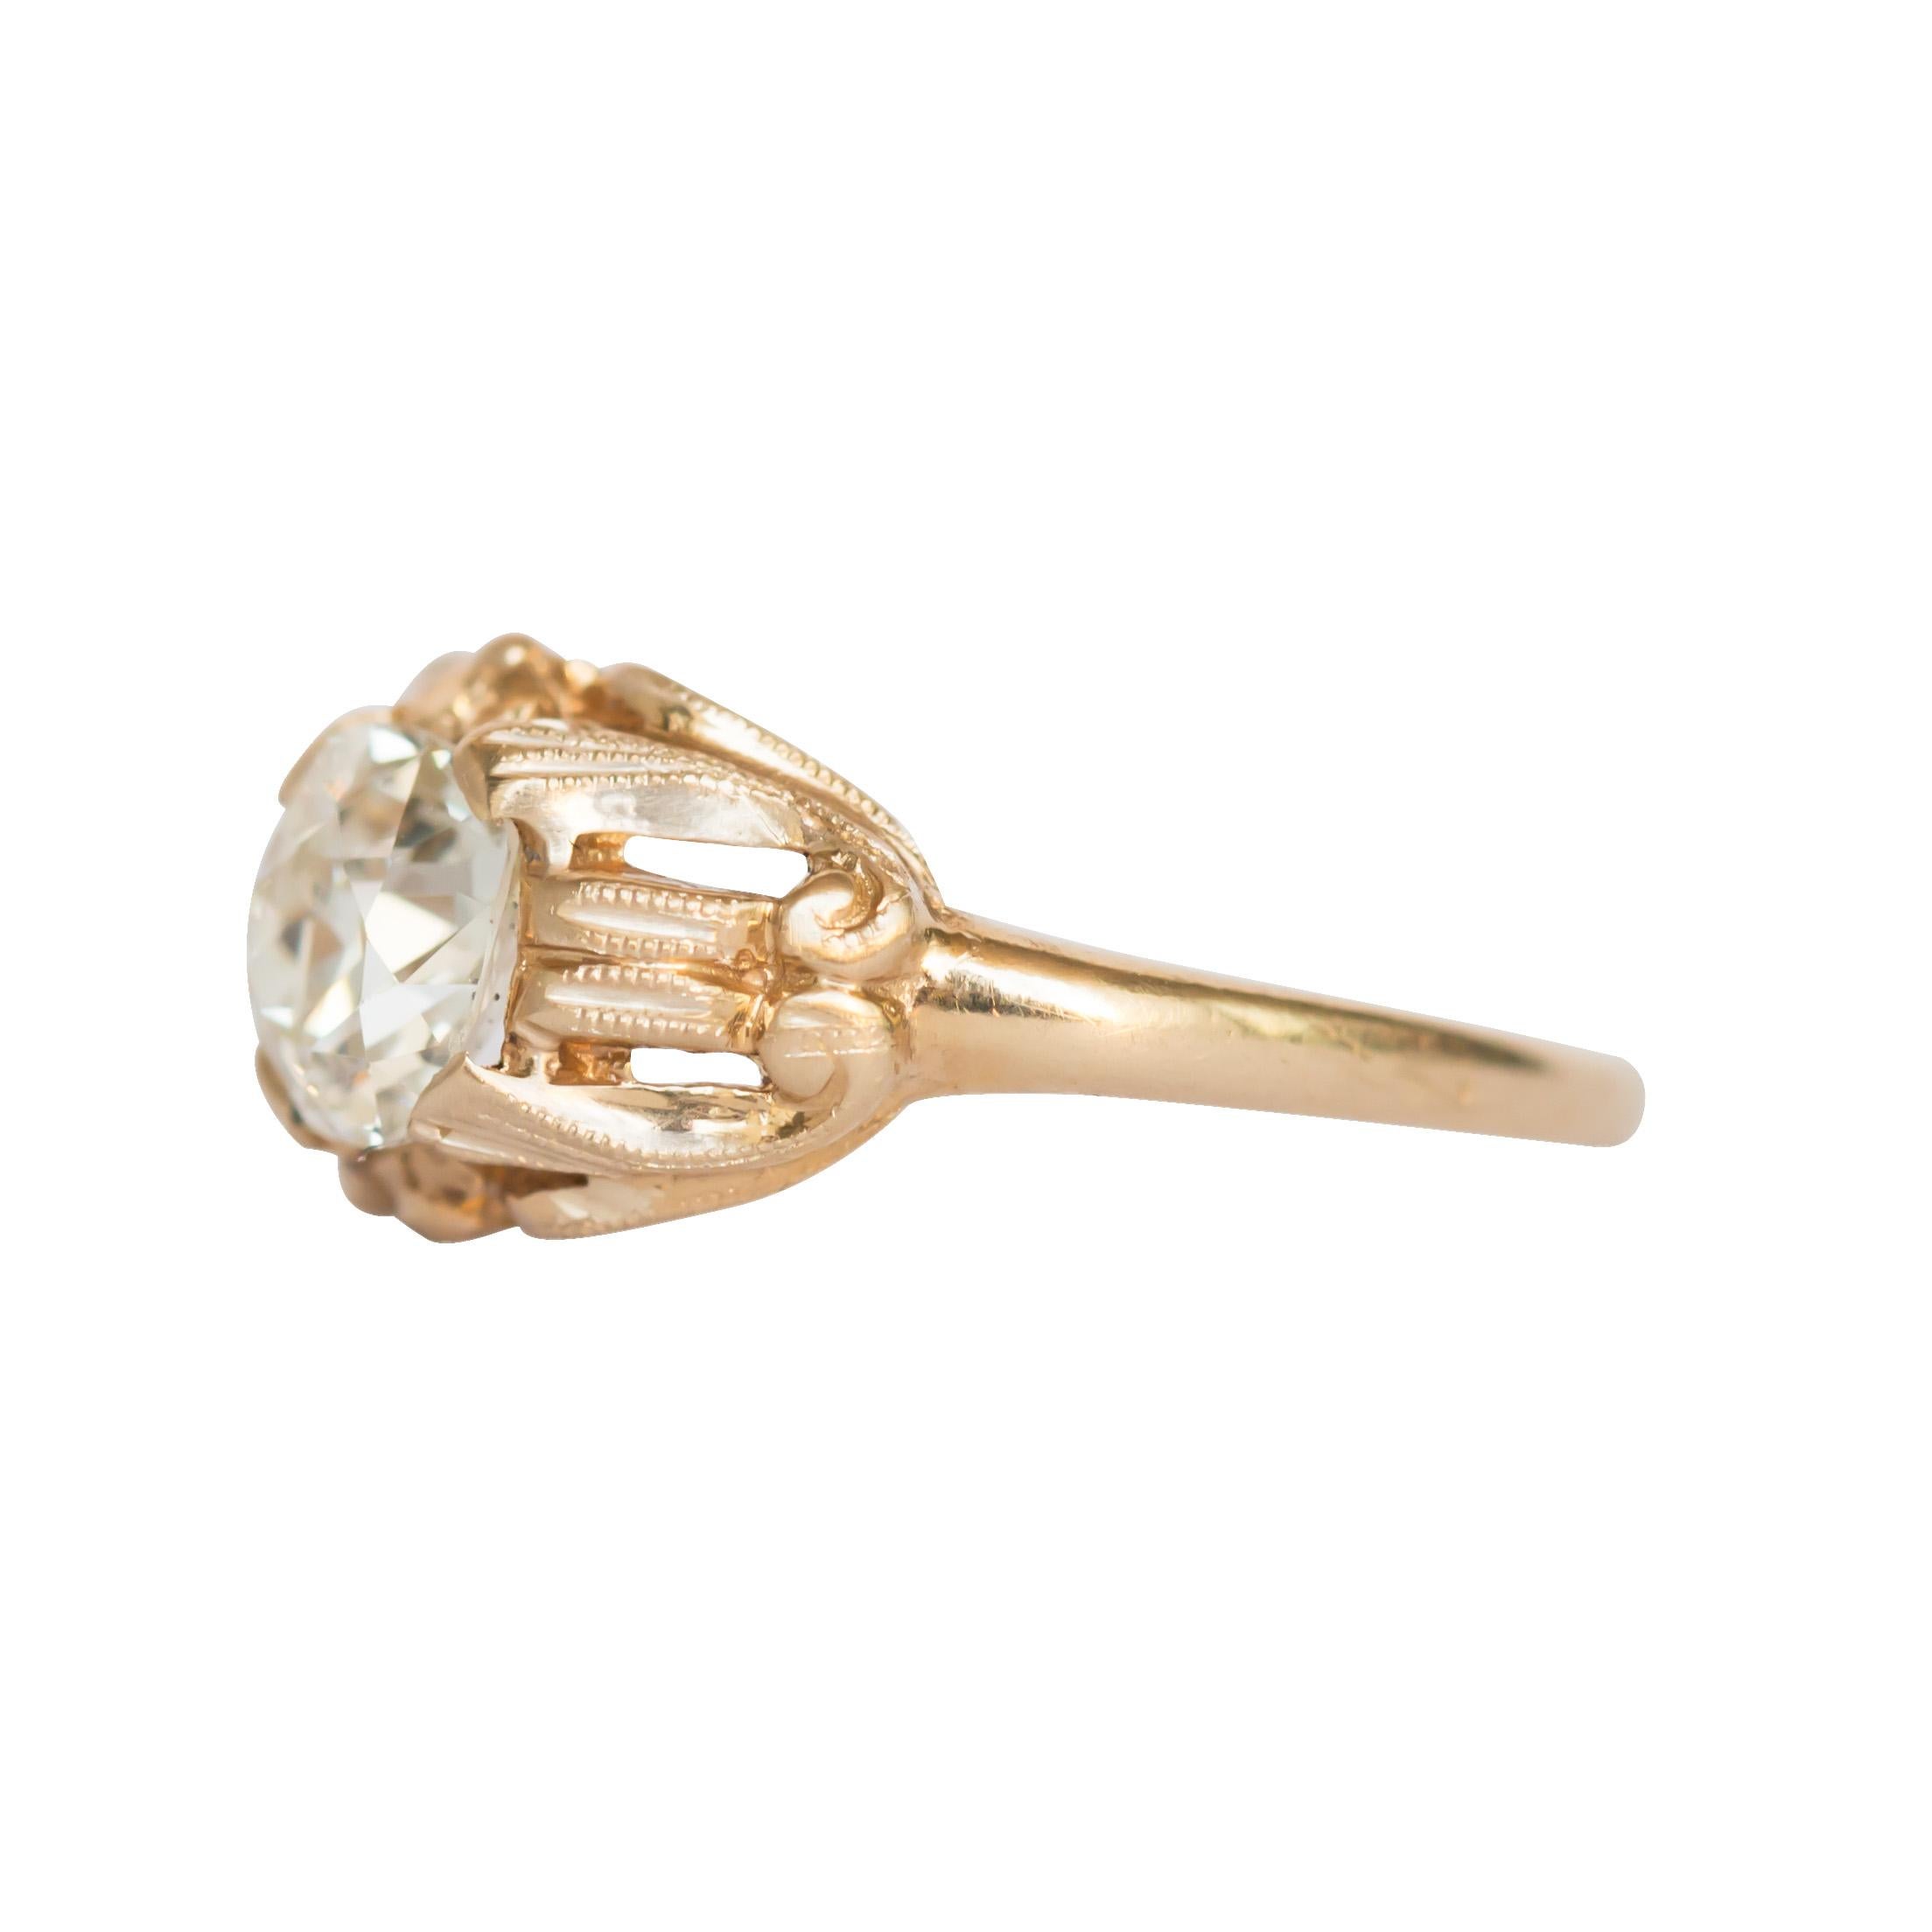 Ring Size: 6.95
Metal Type: 14 karat Yellow Gold 
Weight: 2.8 grams

Center Diamond Details
Shape: Antique Cushion
Carat Weight: .97carat
Color: J
Clarity: SI2


Finger to Top of Stone Measurement: 4.55mm